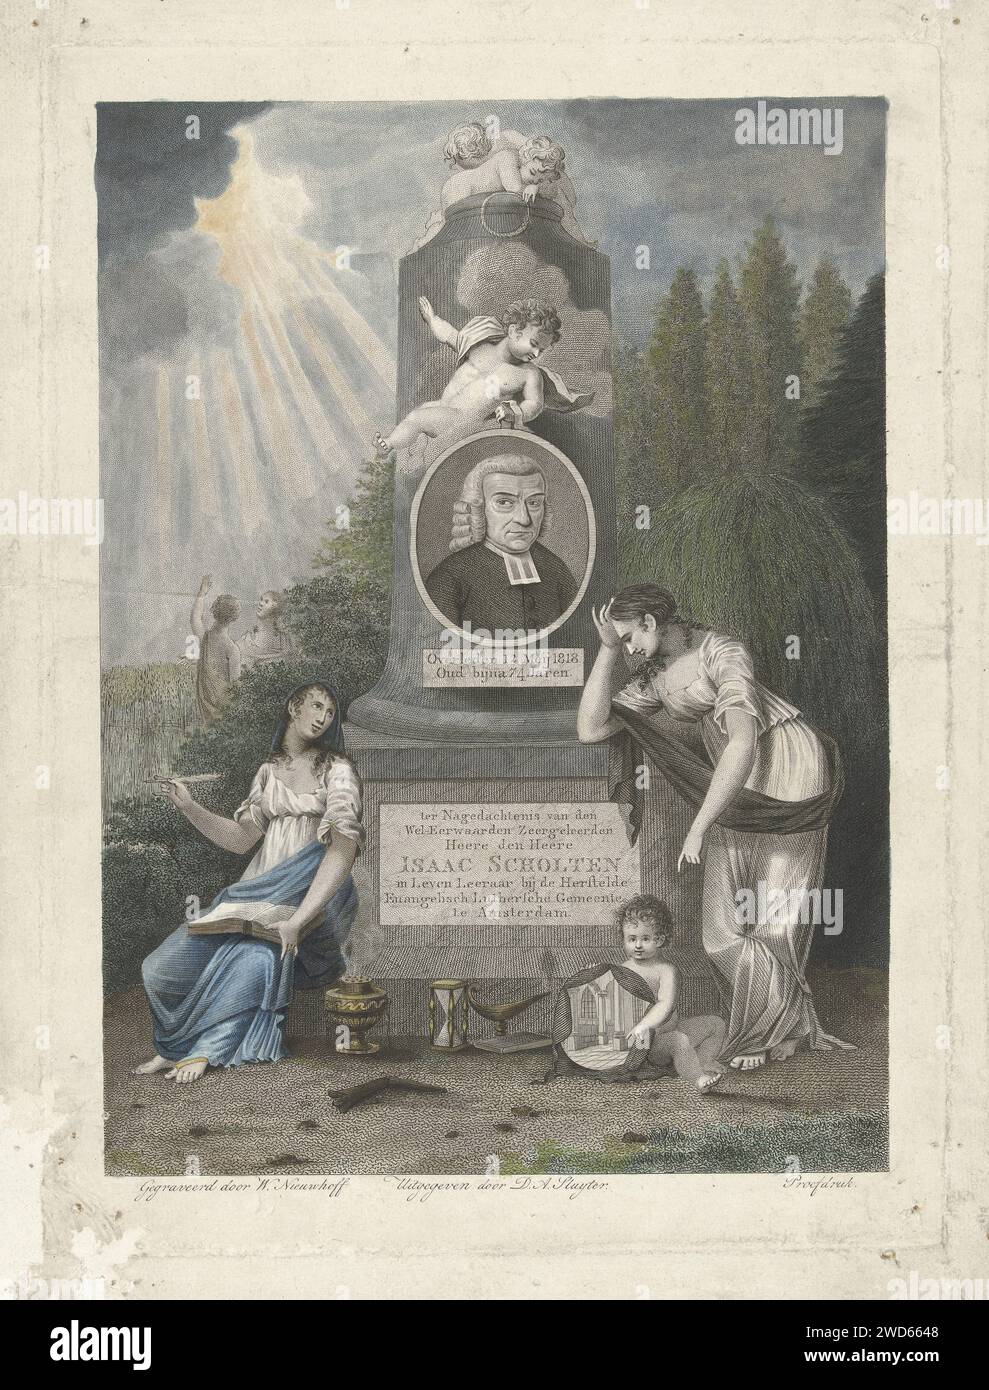 Memorial for Isaac Scholten, Walraad Nieuwhoff, 1818 - 1820 print A memorial for Isaac Scholten, recovered Evangelisch-Luther's pastor in Amsterdam, who died in 1818. The portrait of Scholten has been applied to the column and the basis shows a plaque with a seven -line text in Dutch. The monument is flanked by faith with a book on her lap and in her hand a writing spring and by the grieving religion. A putto shows the image of a church interior. On the ground are the extinguished and broken torch and an hourglass as a sign of death. On the left in the background are two figures between Korens Stock Photo